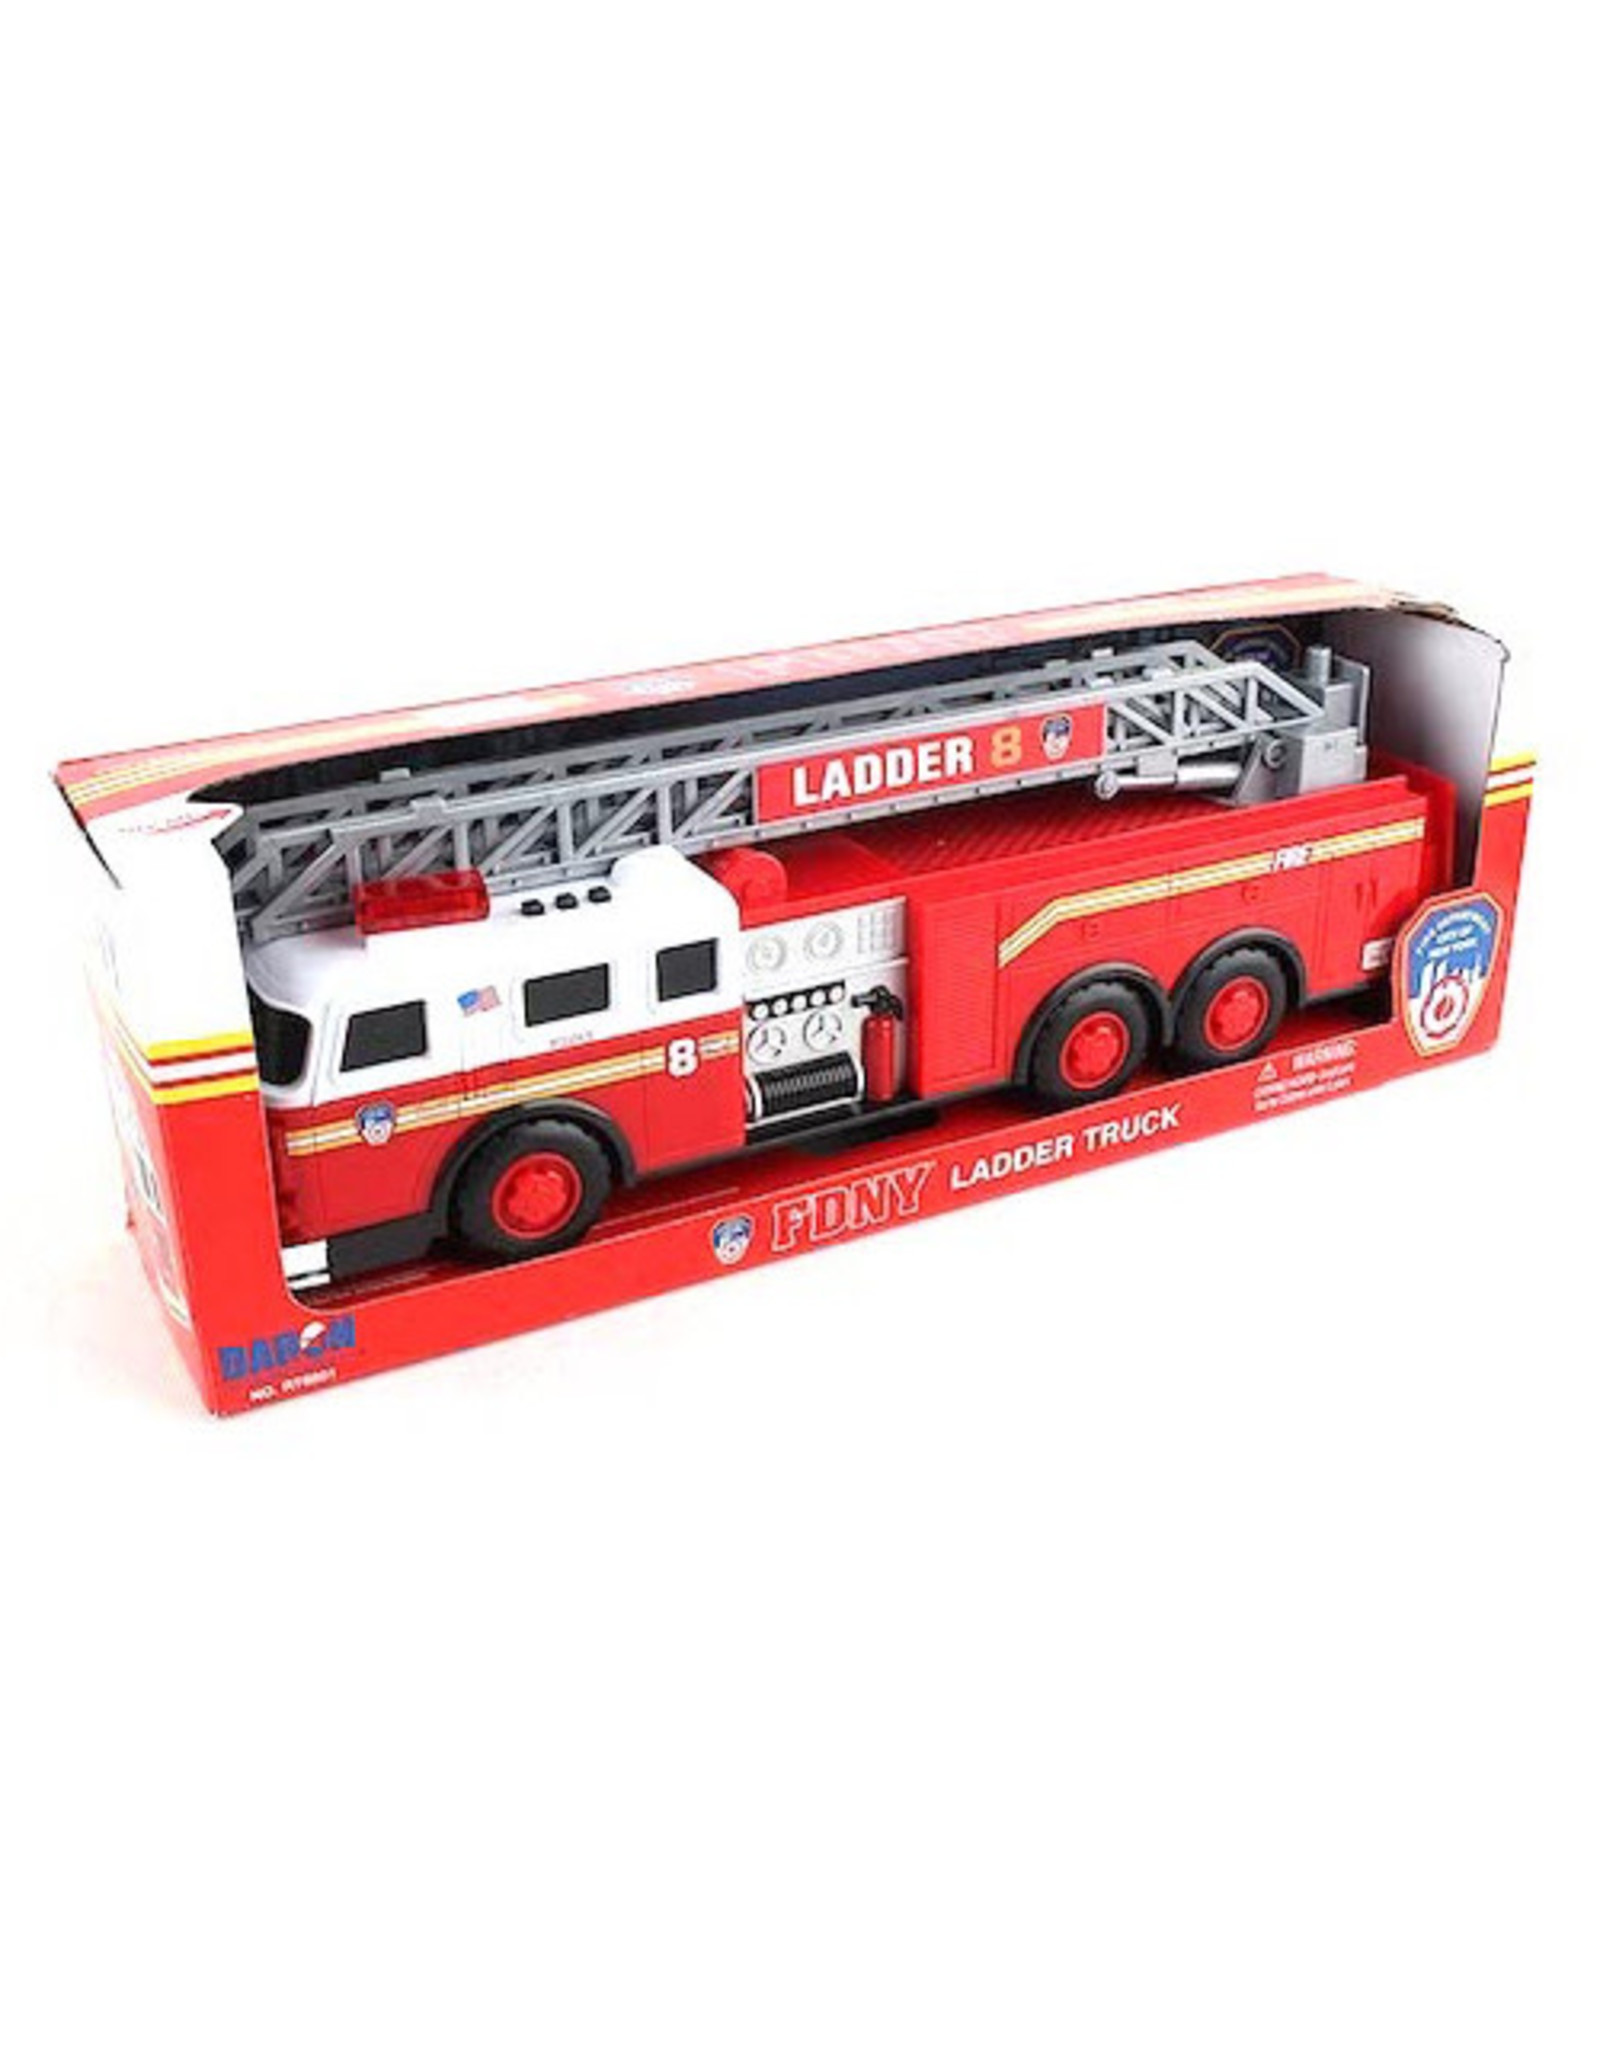 FDNY Fire Ladder Truck with Lights & Sounds